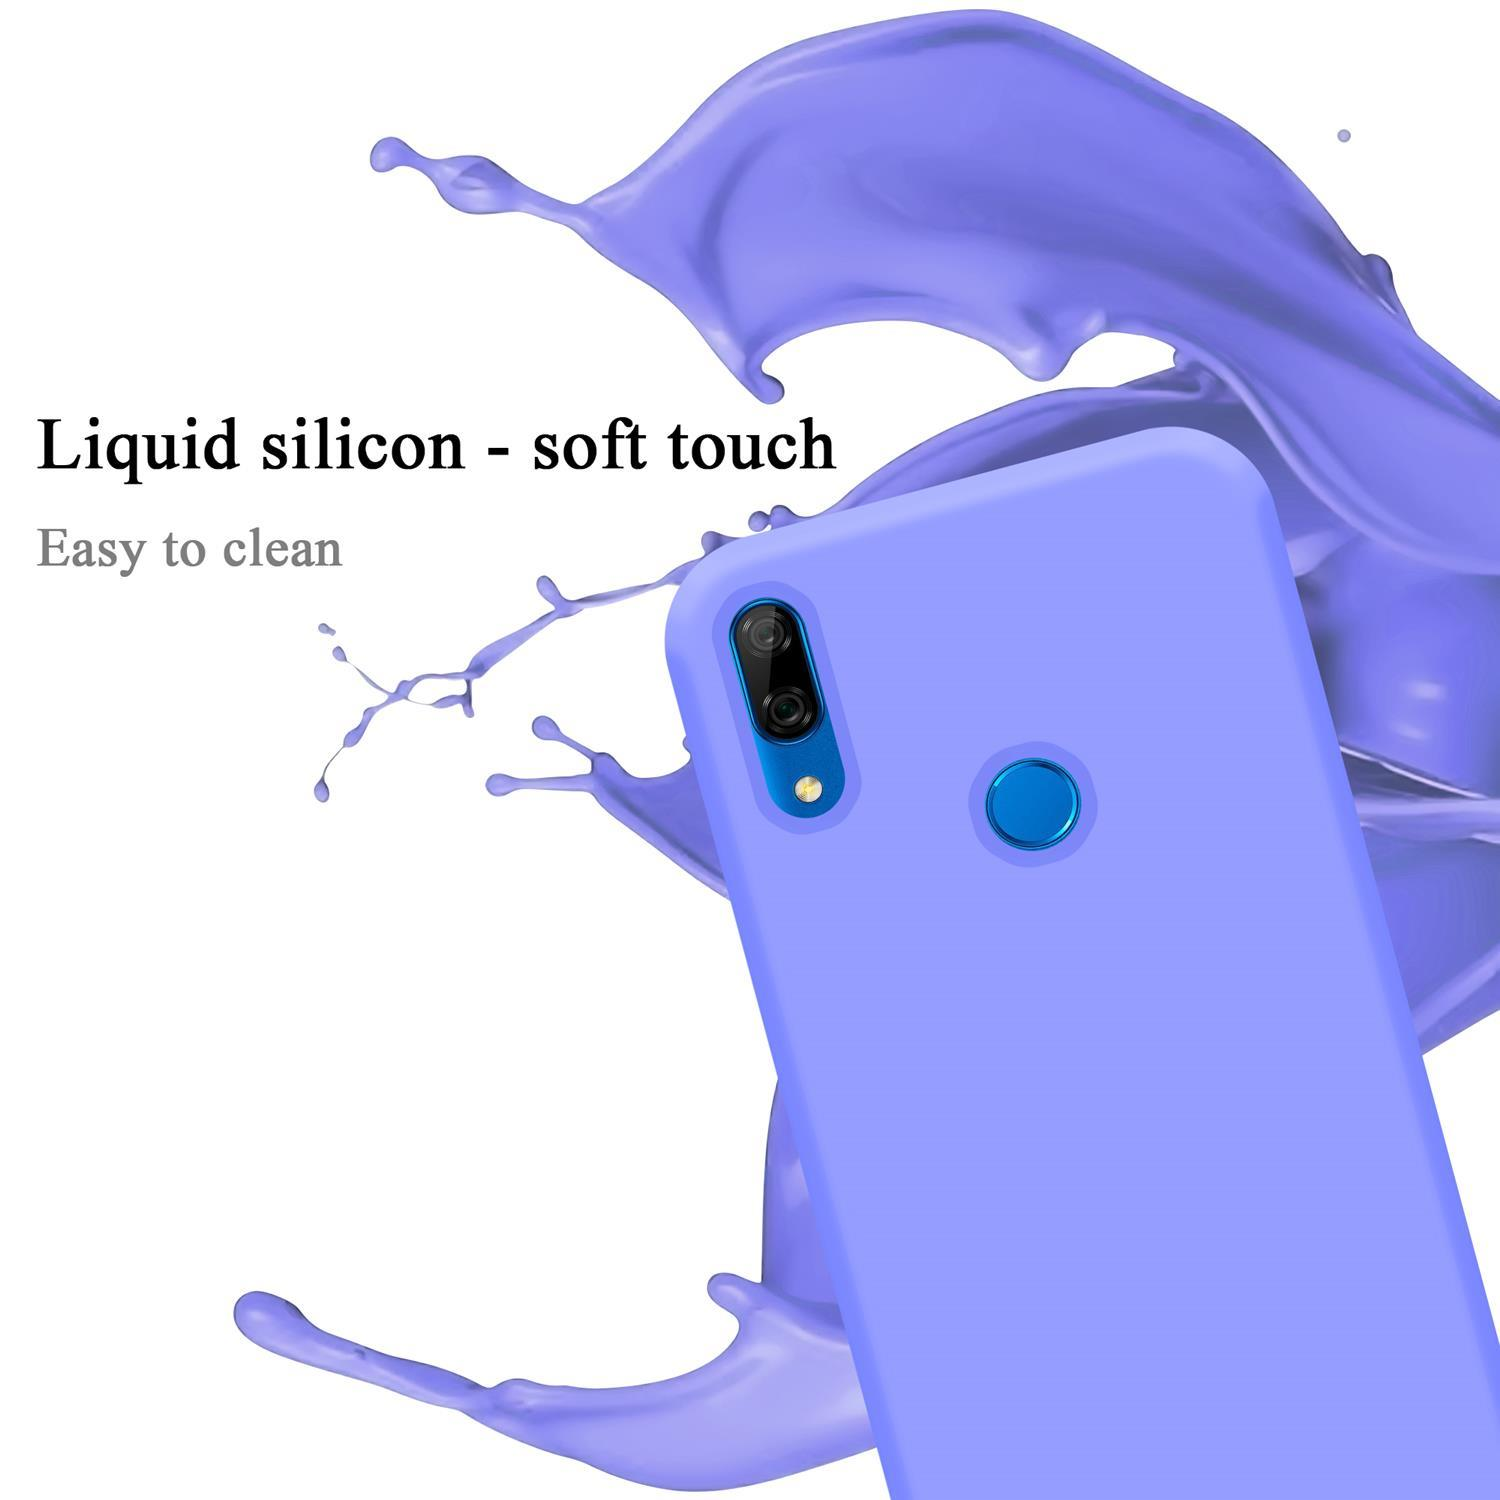 LITE P LIQUID LILA Silicone im 2019, Backcover, CADORABO Huawei Liquid / Style, SMART Case HELL 10 Hülle Honor,